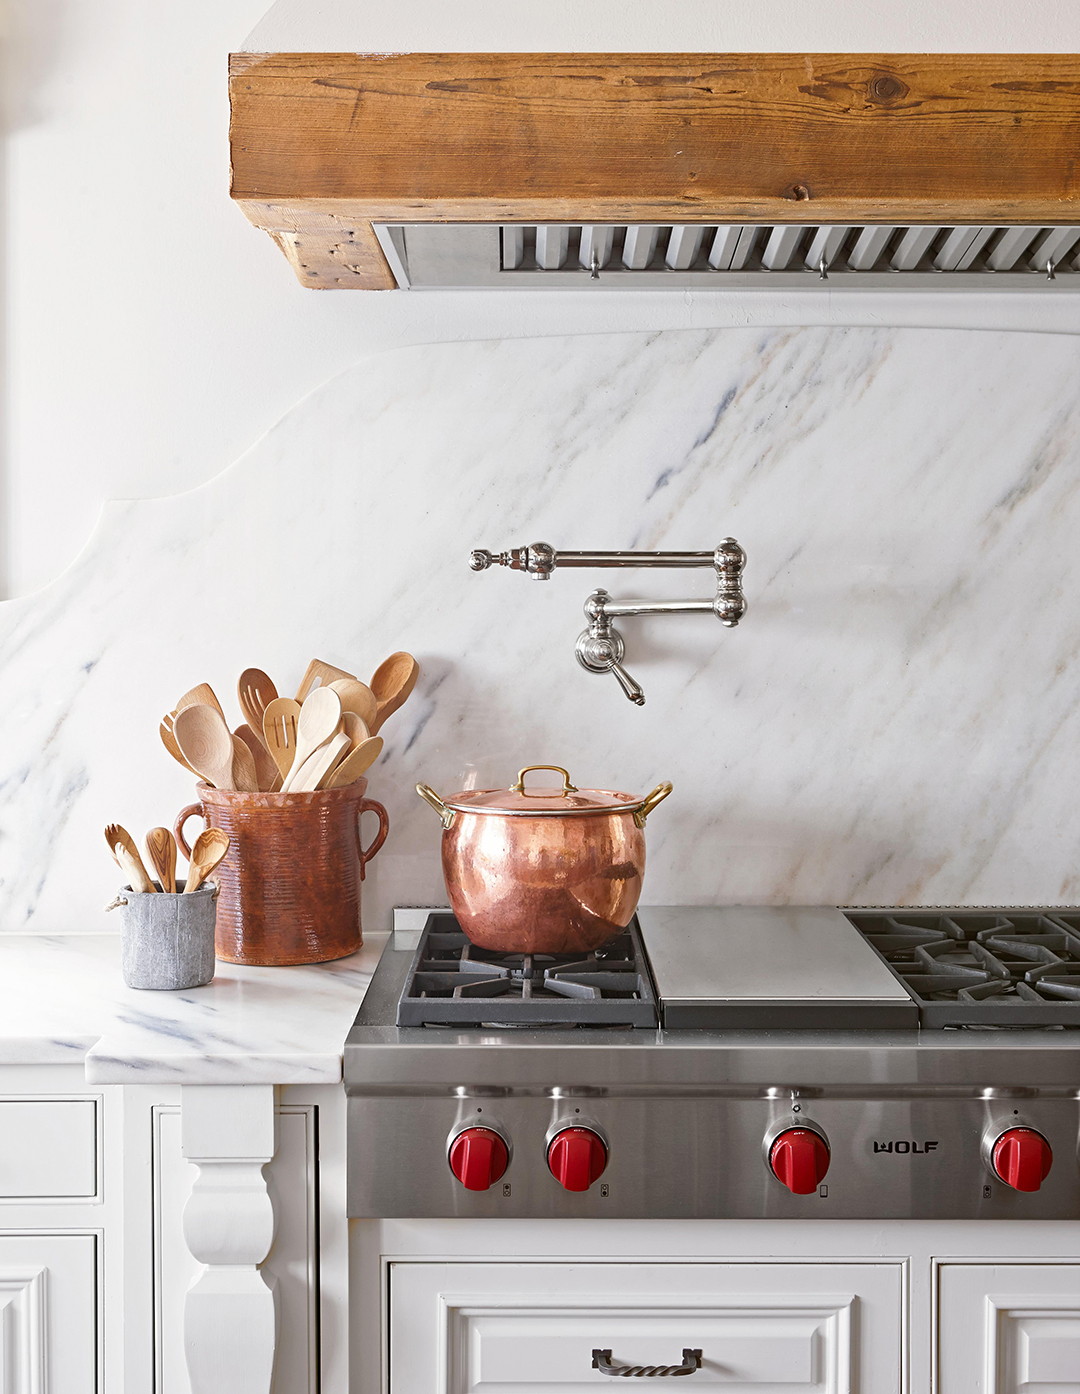 Copper Subway Tile Backsplash Inspirational Kitchen Trends that are Here to Stay